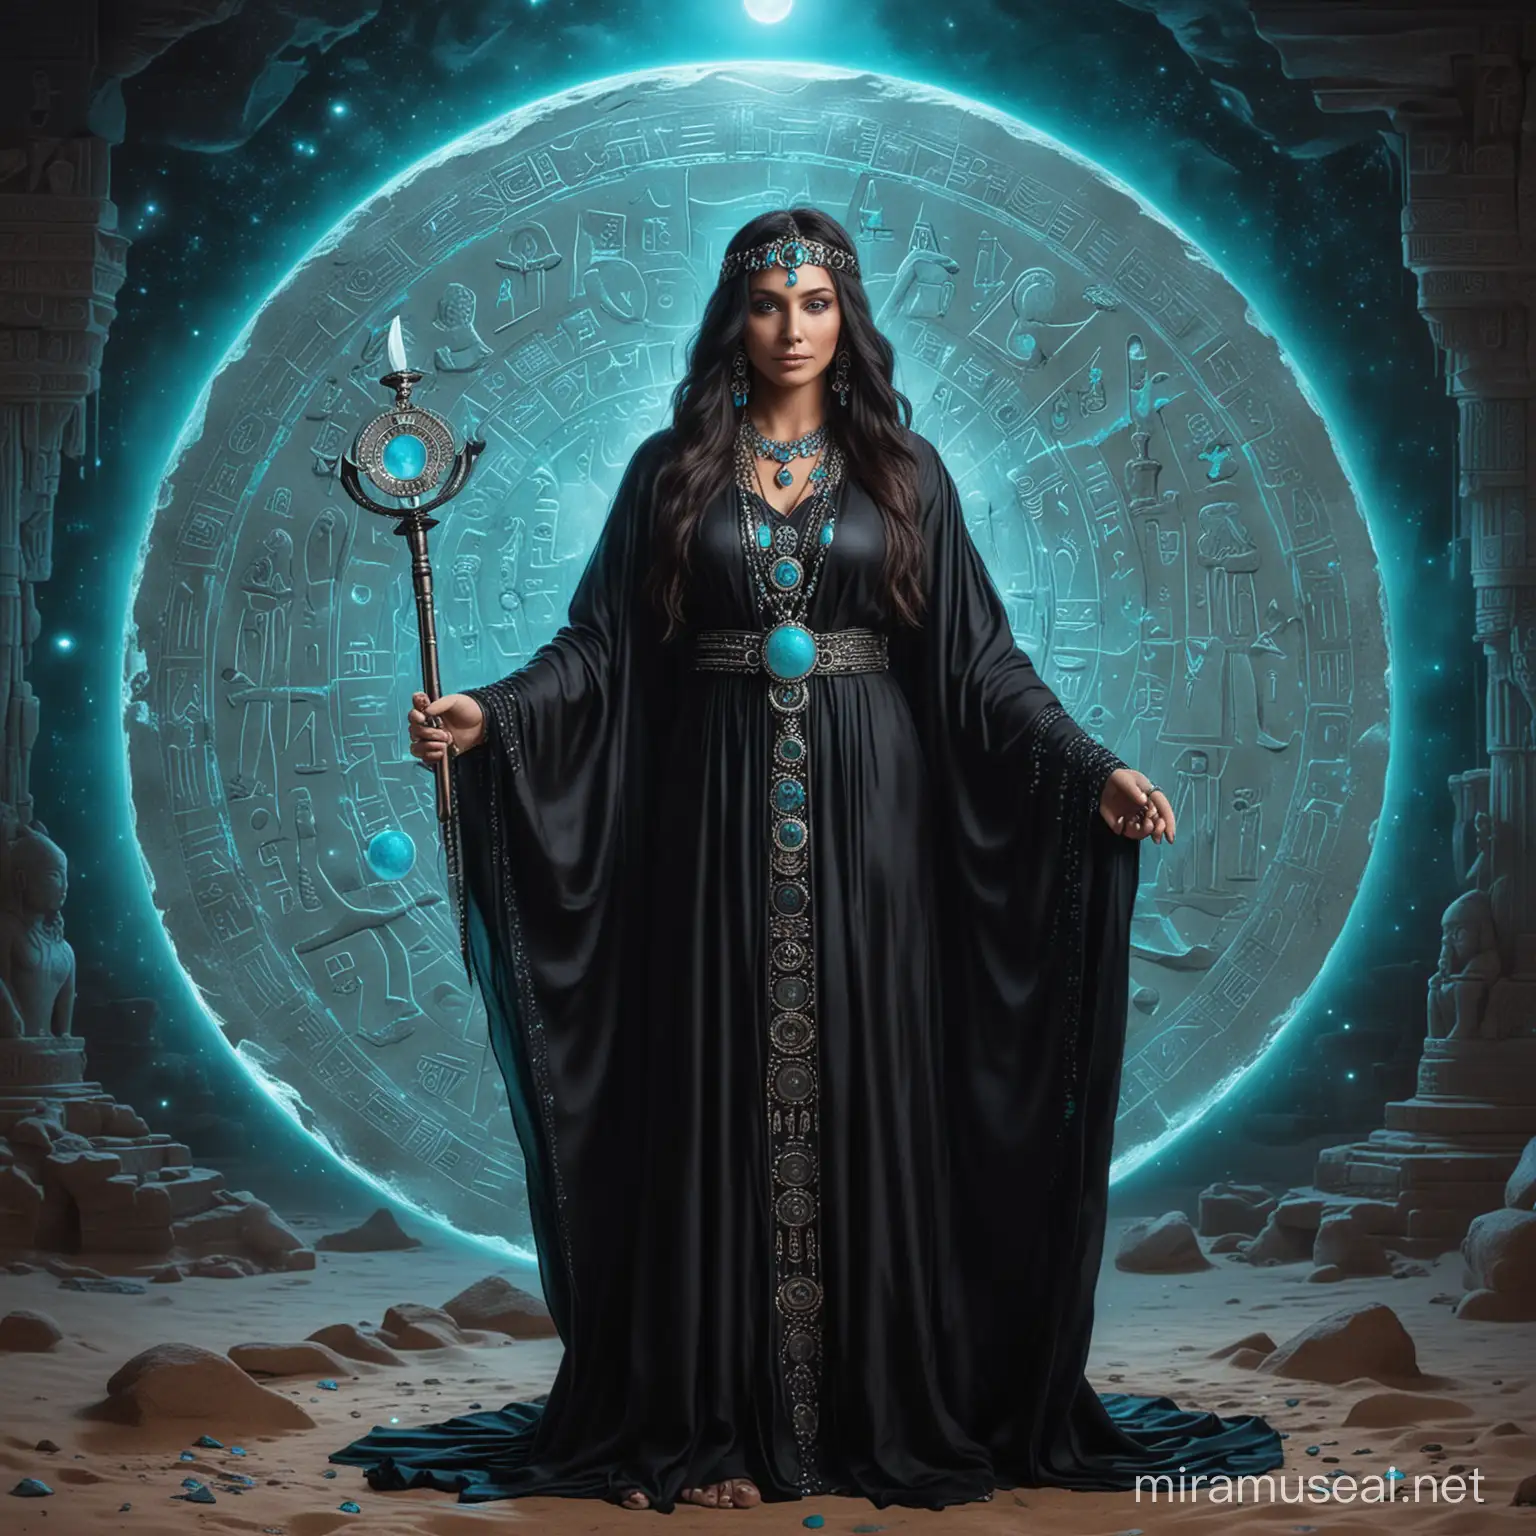 Goddess of dark magic. Wearing a black kaftan, and silver jewellery. Holding a staff in one hand and an orb of turquoise blue light on the other. Standing behind a lunar disc, the edges of the disc bearing hieroglyphic symbols.